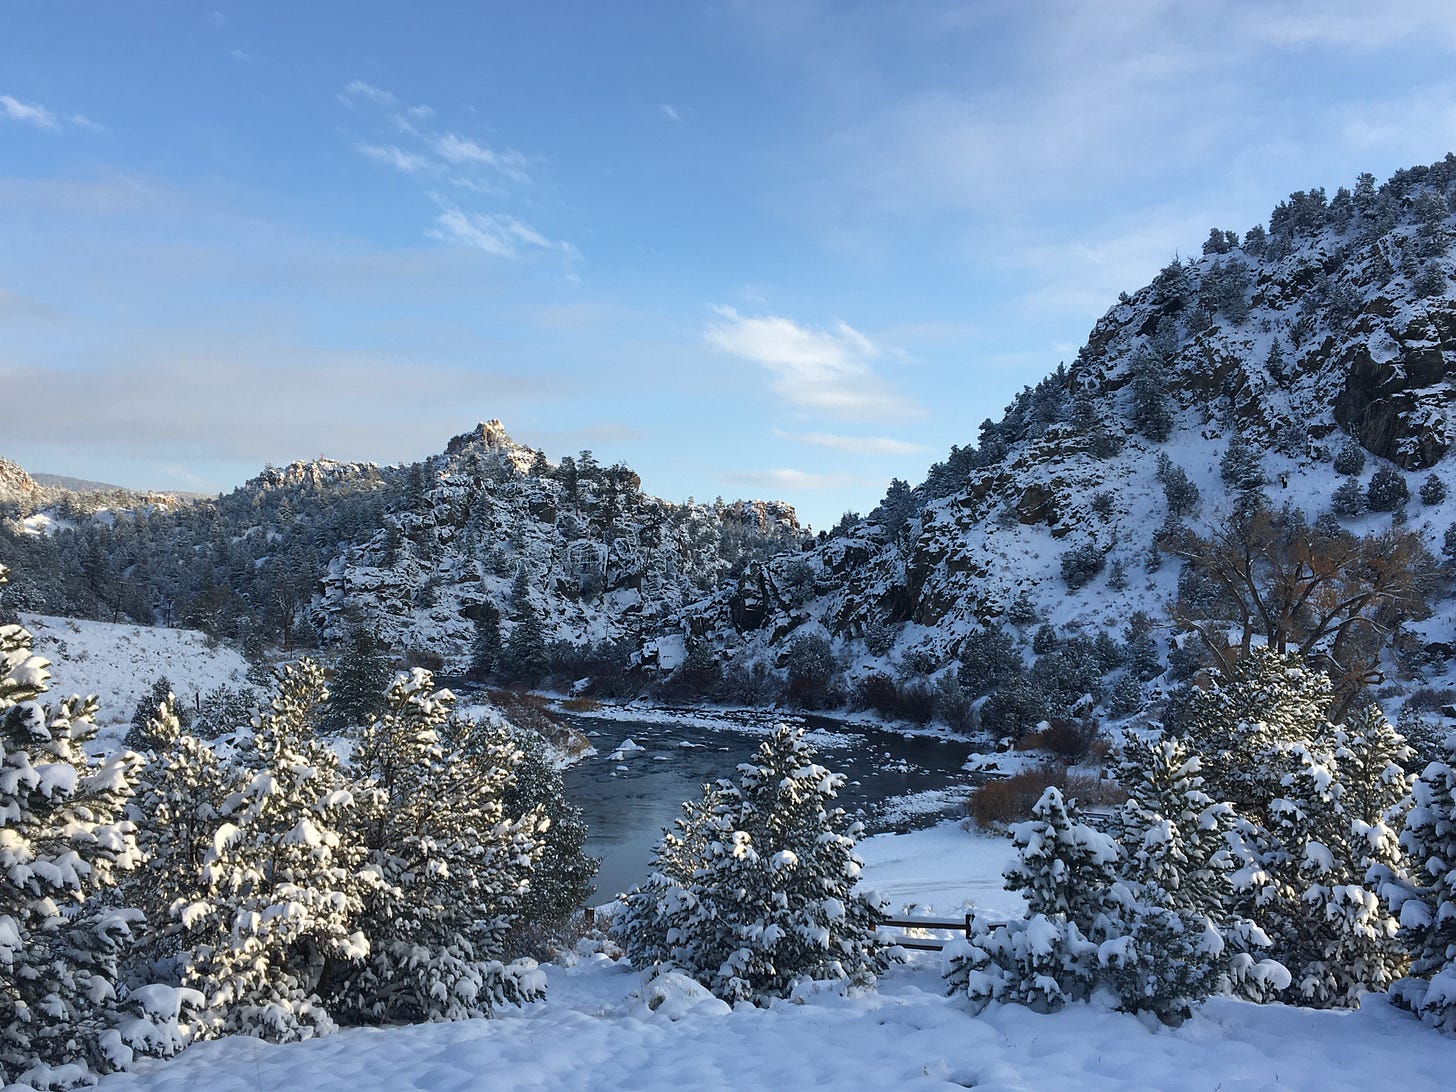 The blue-black Arkansas River rounds a bend beneath a craggy winterscape of snow-covered evergreens shrouded in icy blue shadows. Overhead, wispy clouds drift across a bright, baby blue sky as morning light reaches the low treetops in the foreground and forested terrain in the distance.